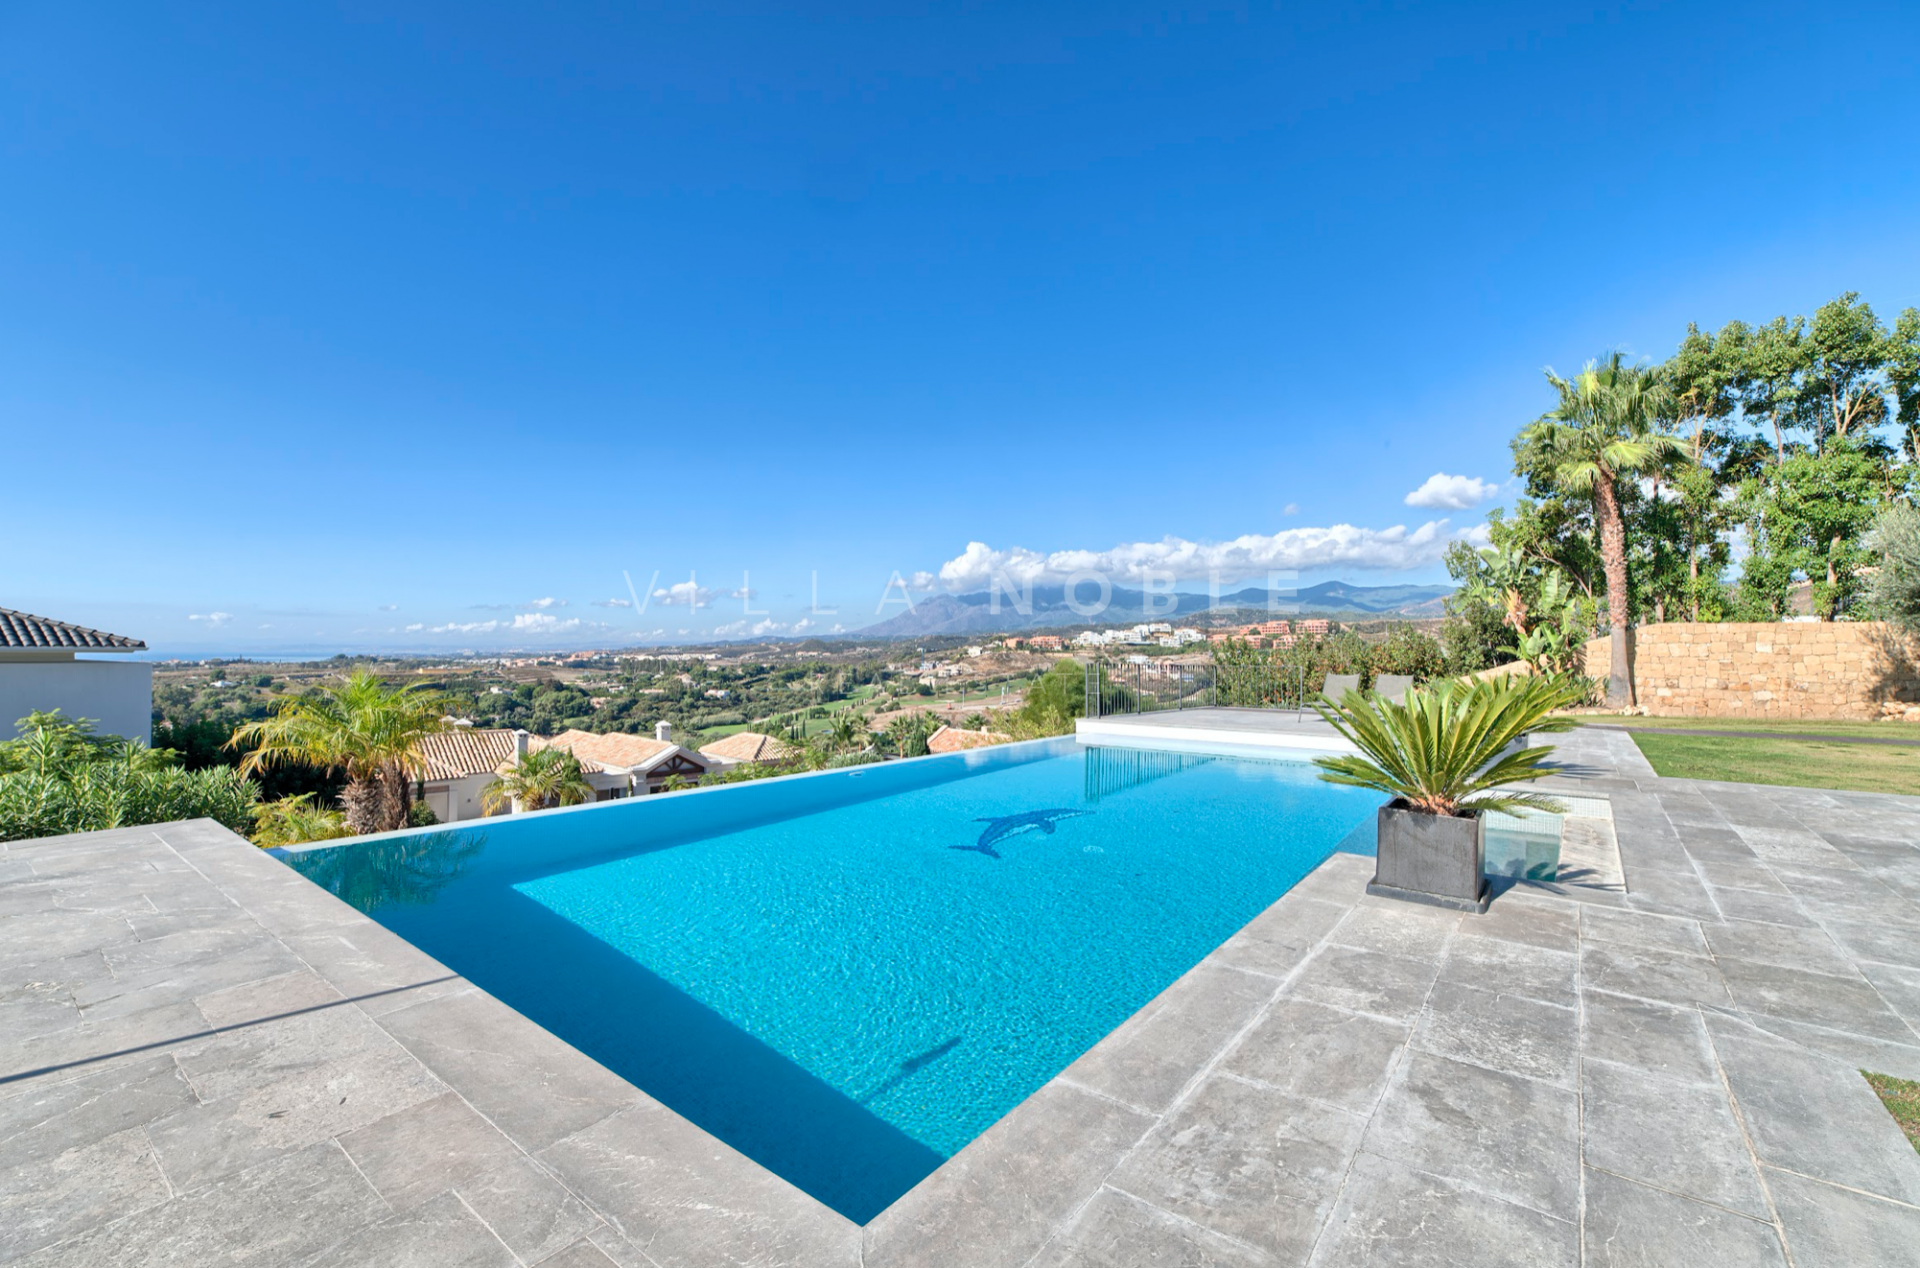 Top quality villa with spectacular views to the Mediterranean